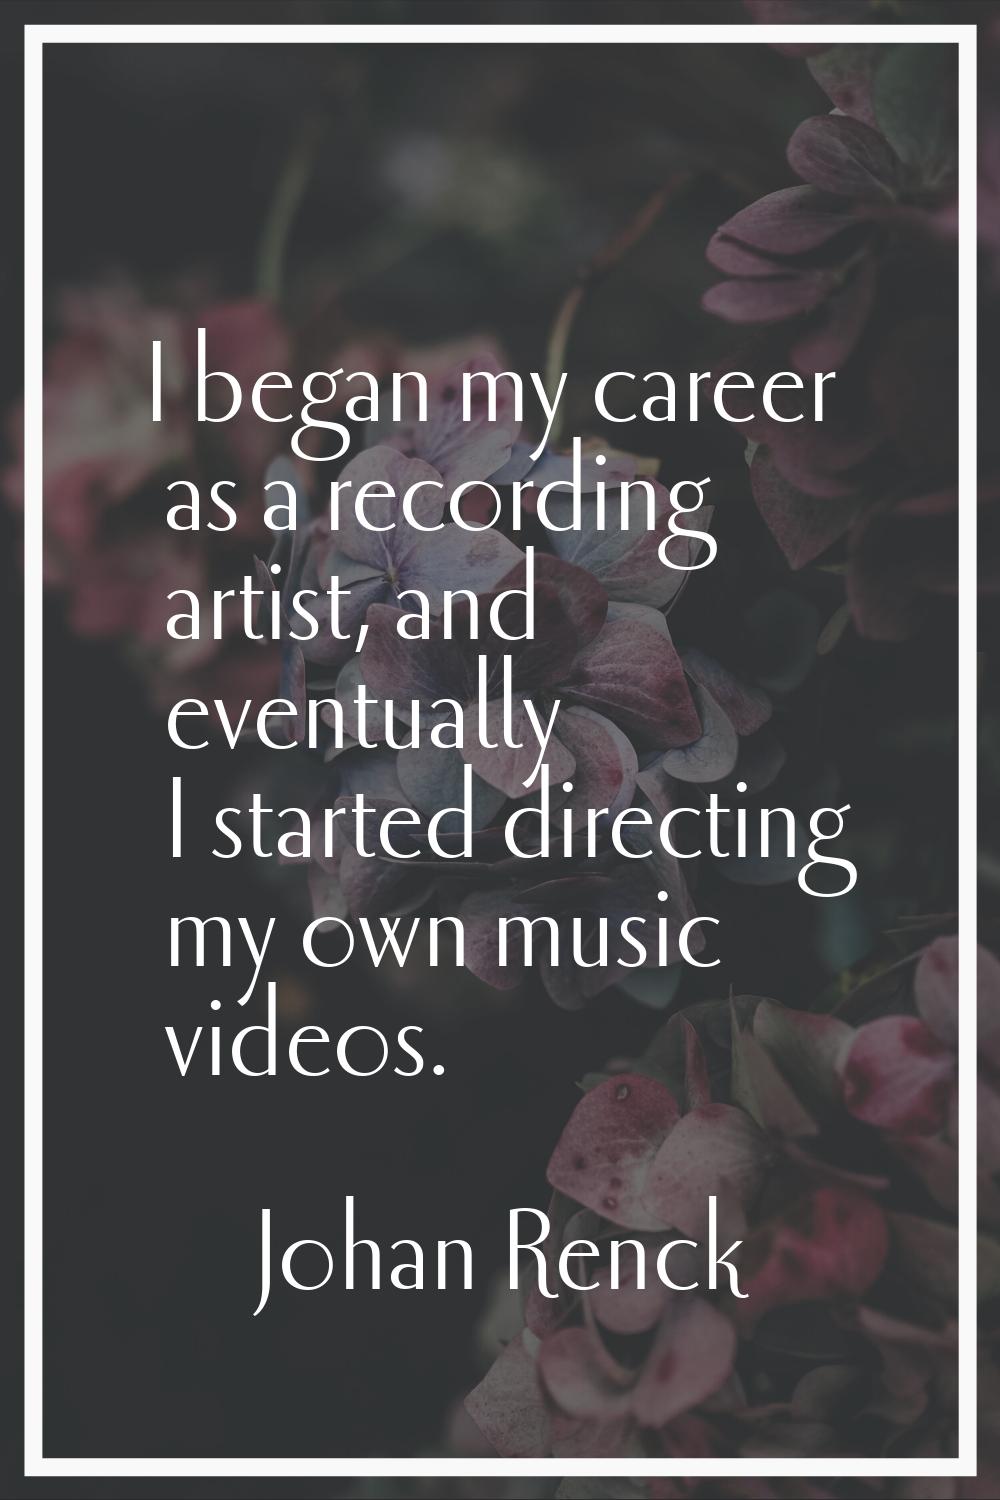 I began my career as a recording artist, and eventually I started directing my own music videos.